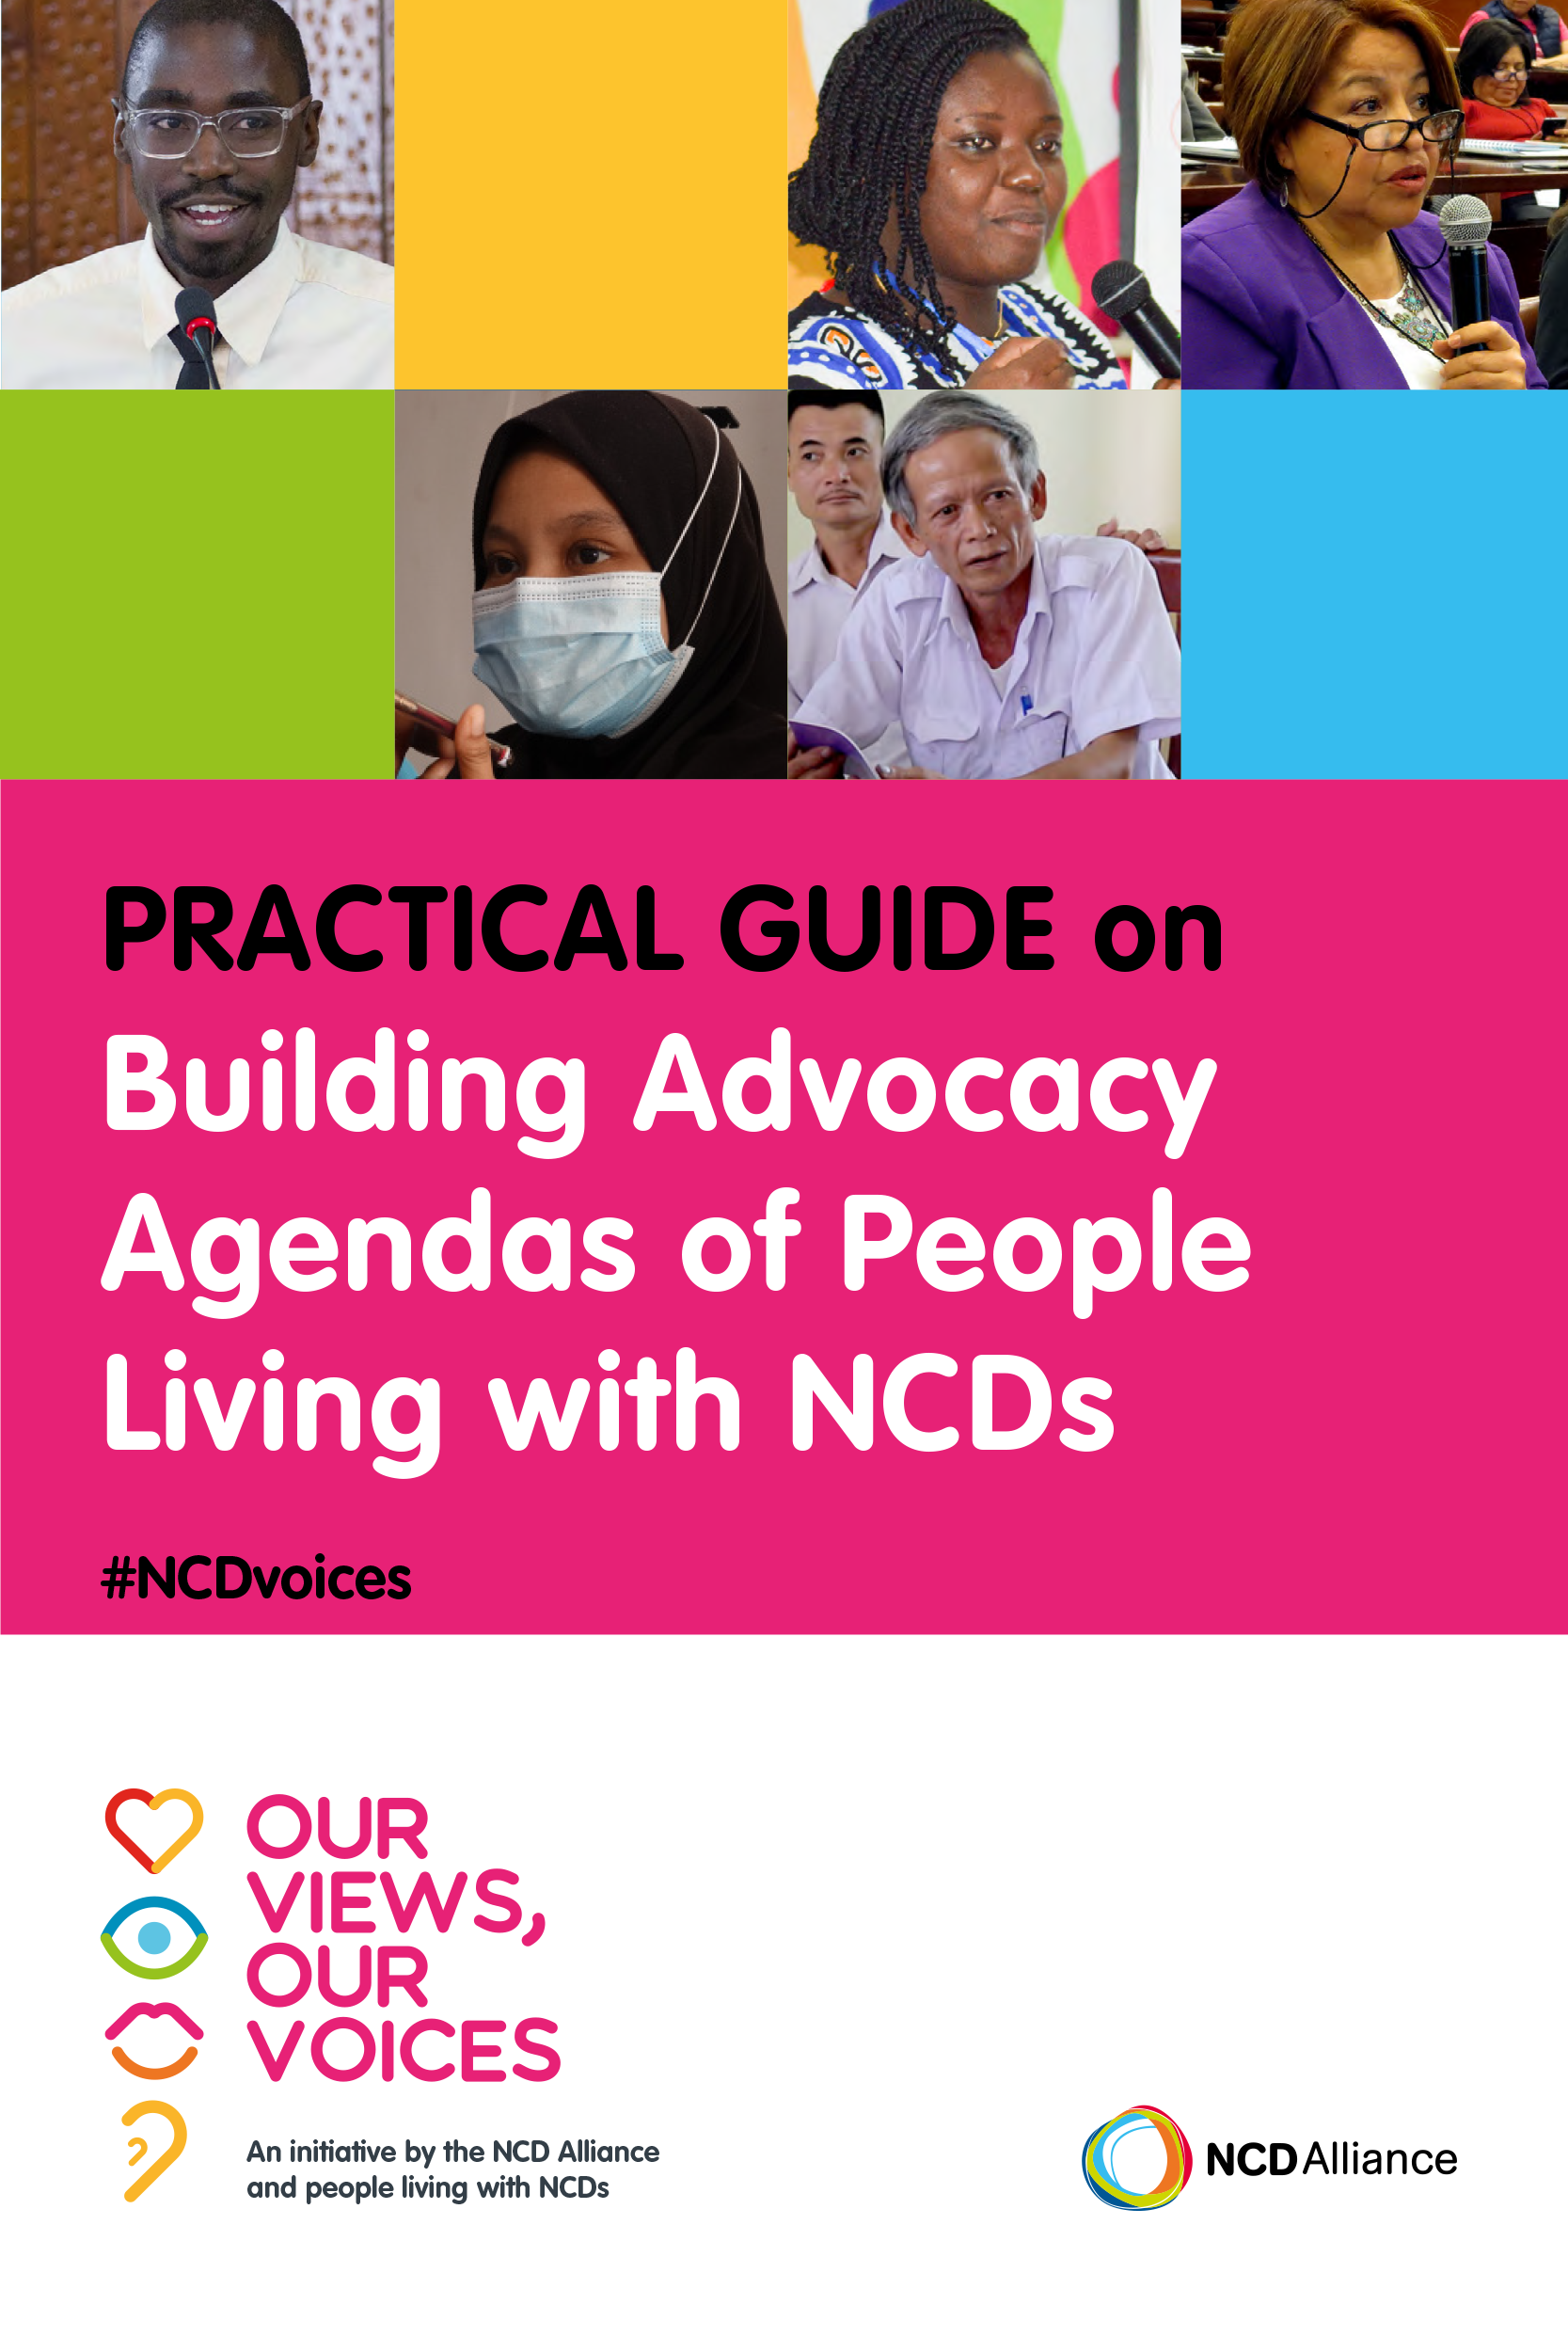 Building Advocacy Agendas of People Living with NCDs